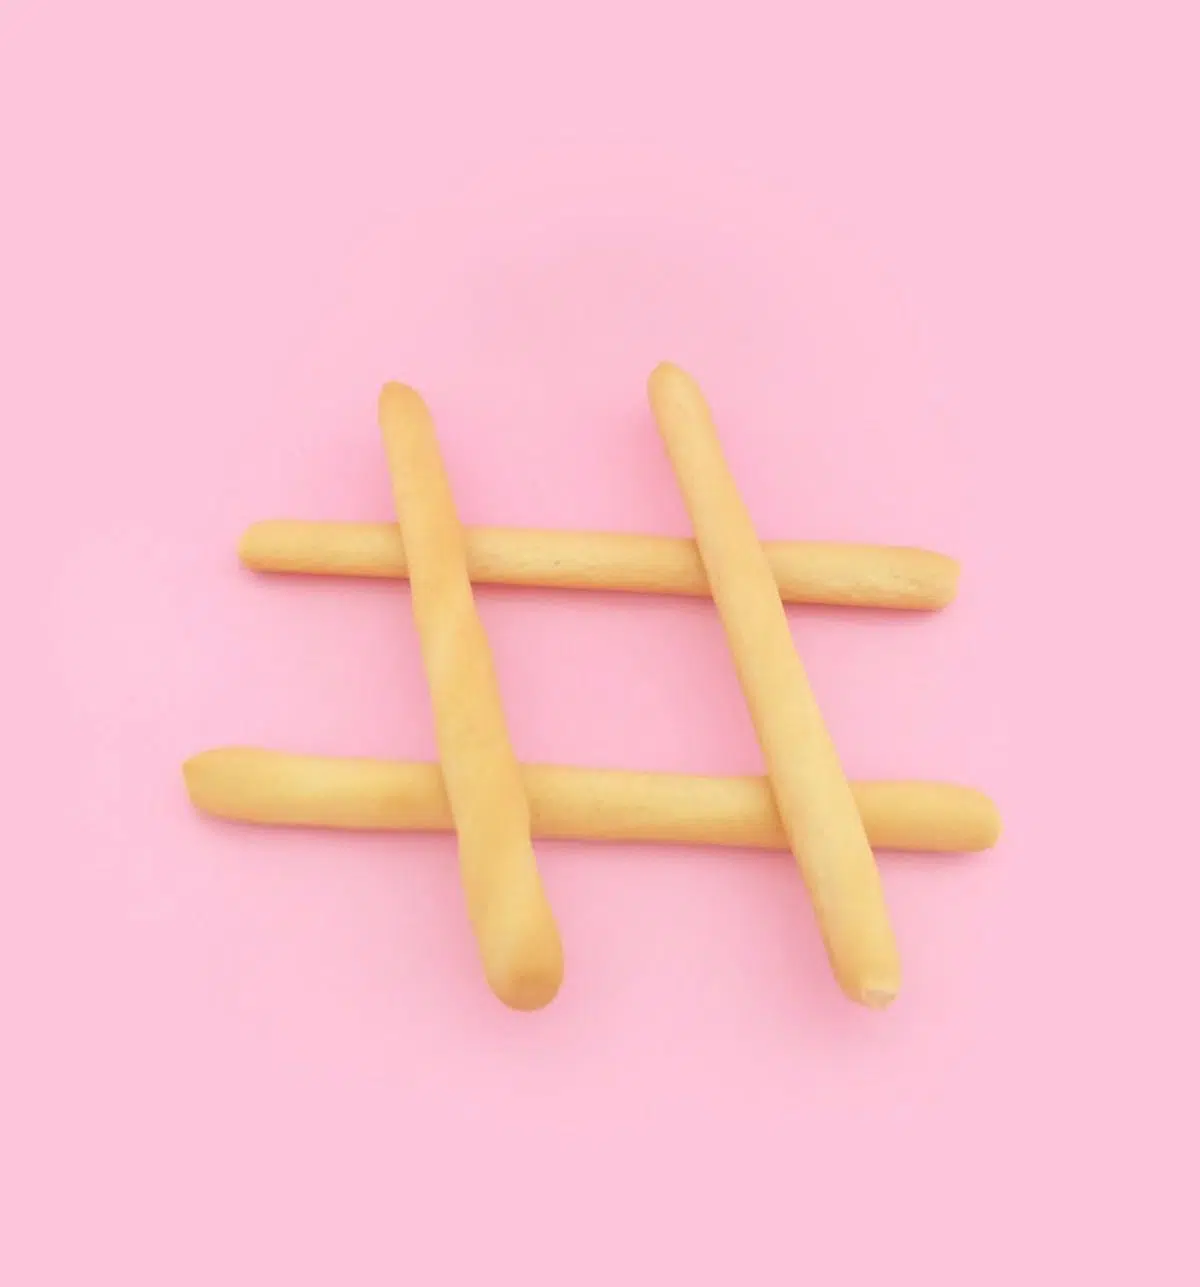 hashtag breadsticks in front of pink background